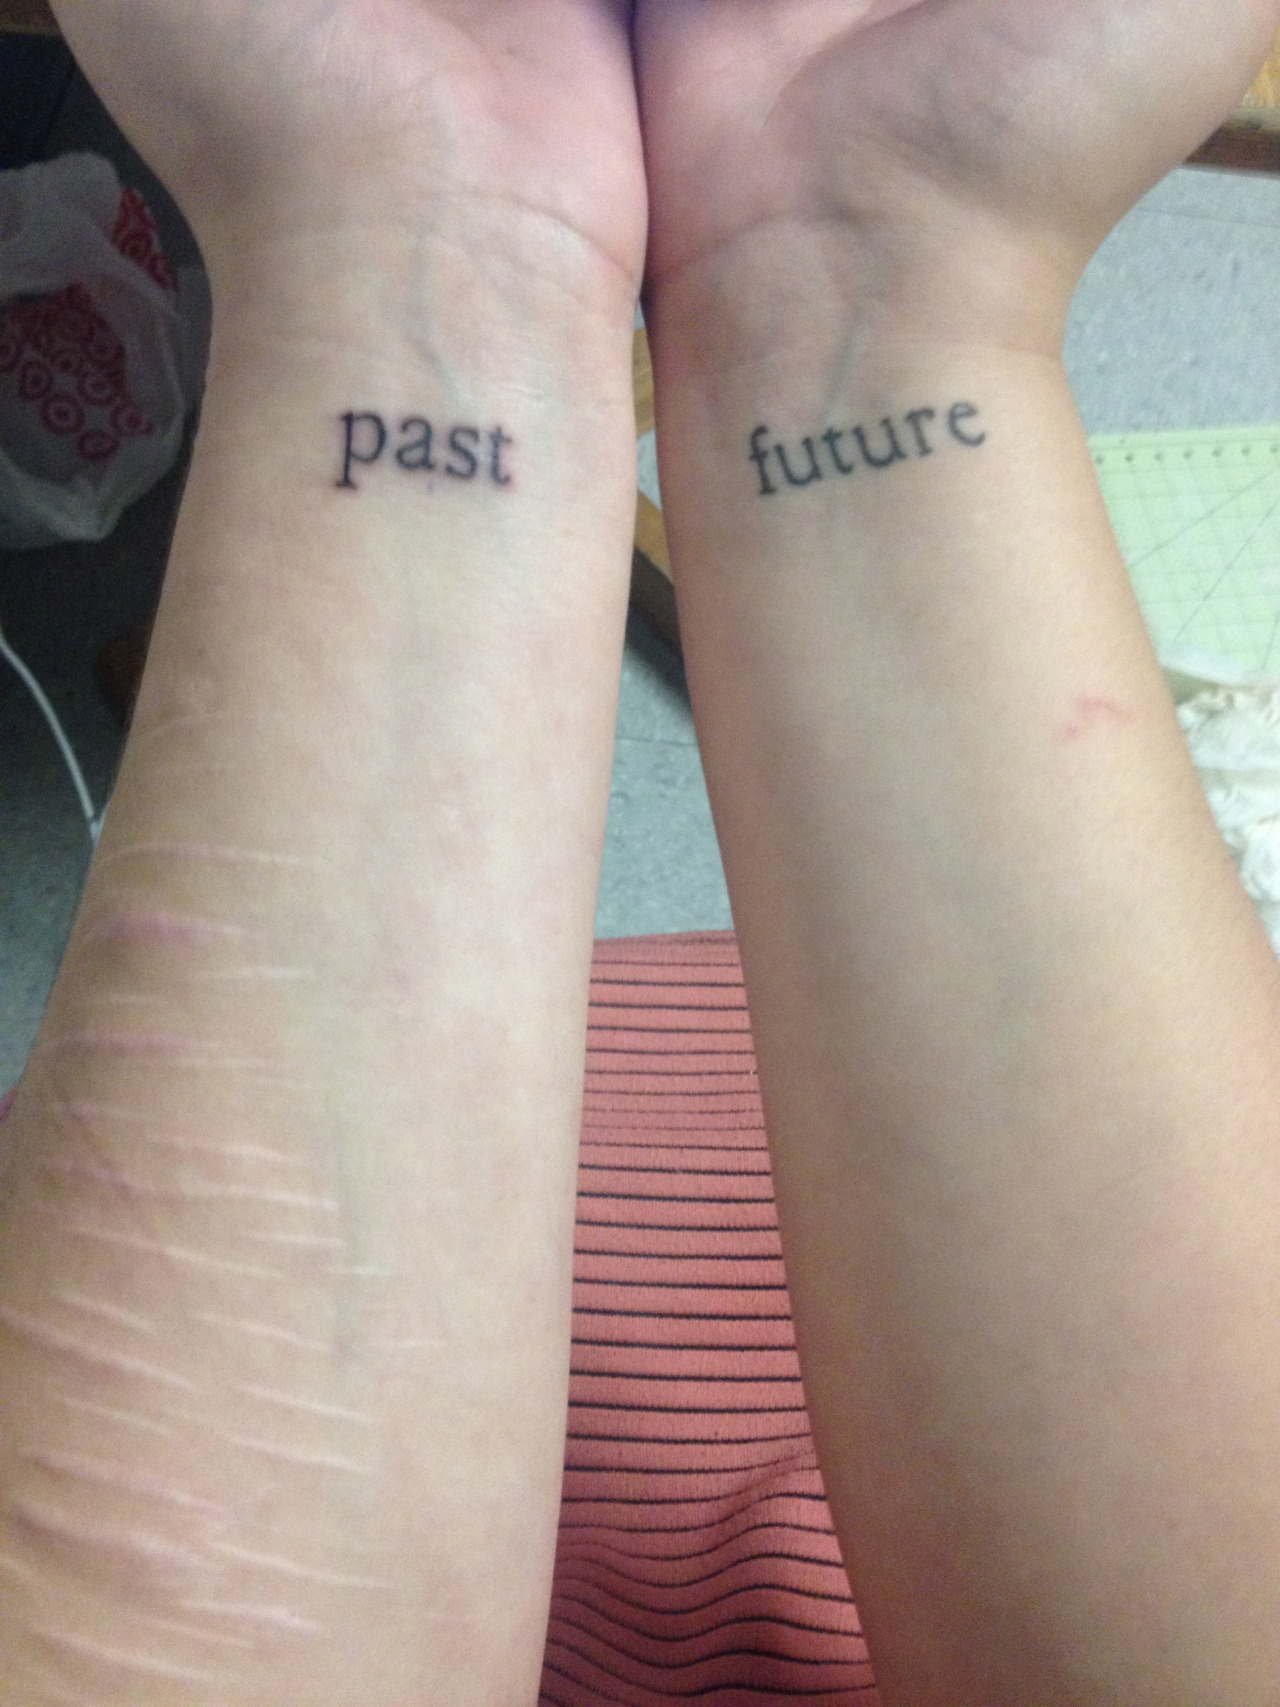  — “past” done by kyle oxford at read street tattoo...